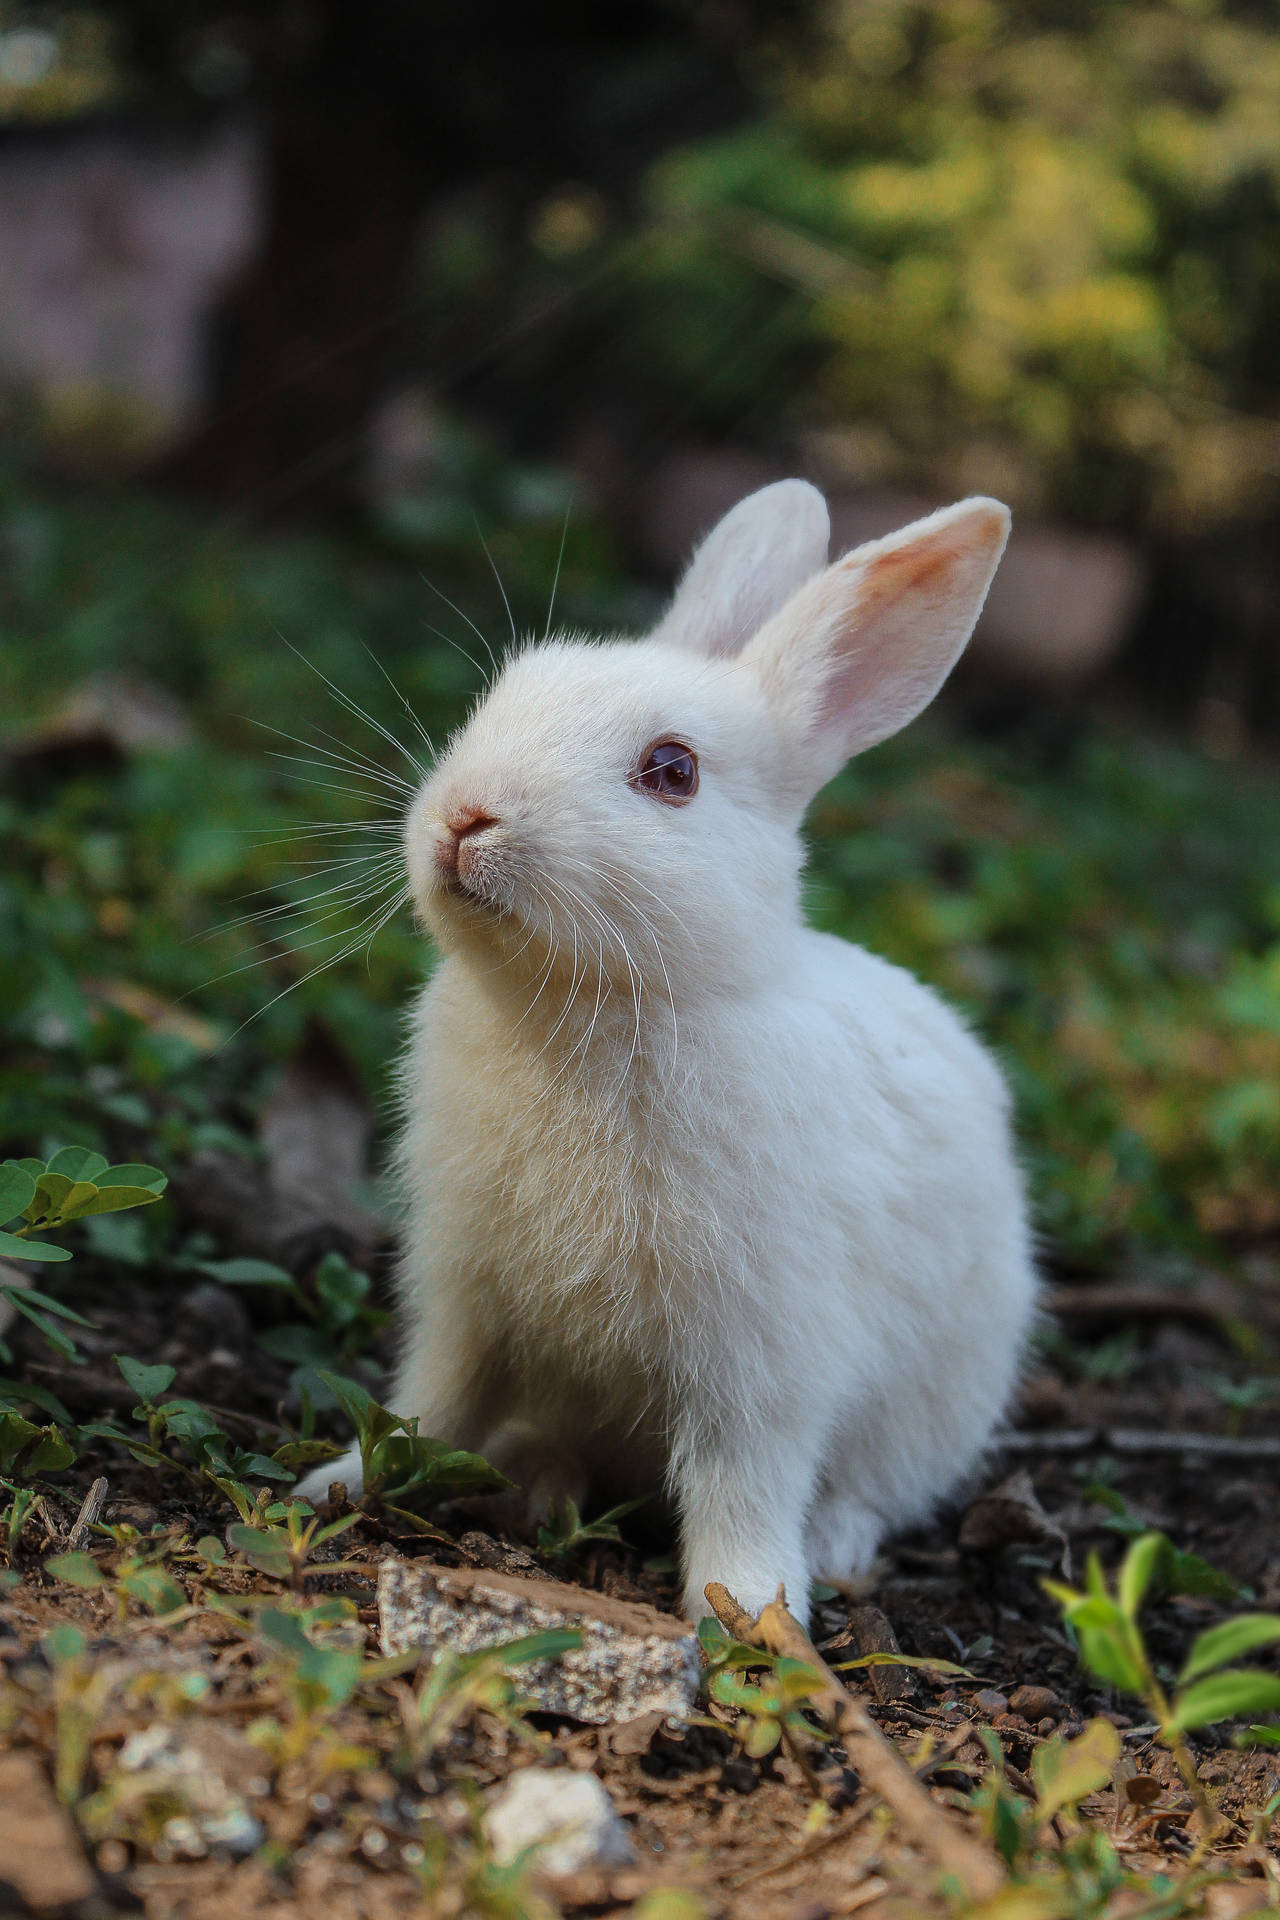 Adorable White Bunny in a Natural Setting Wallpaper